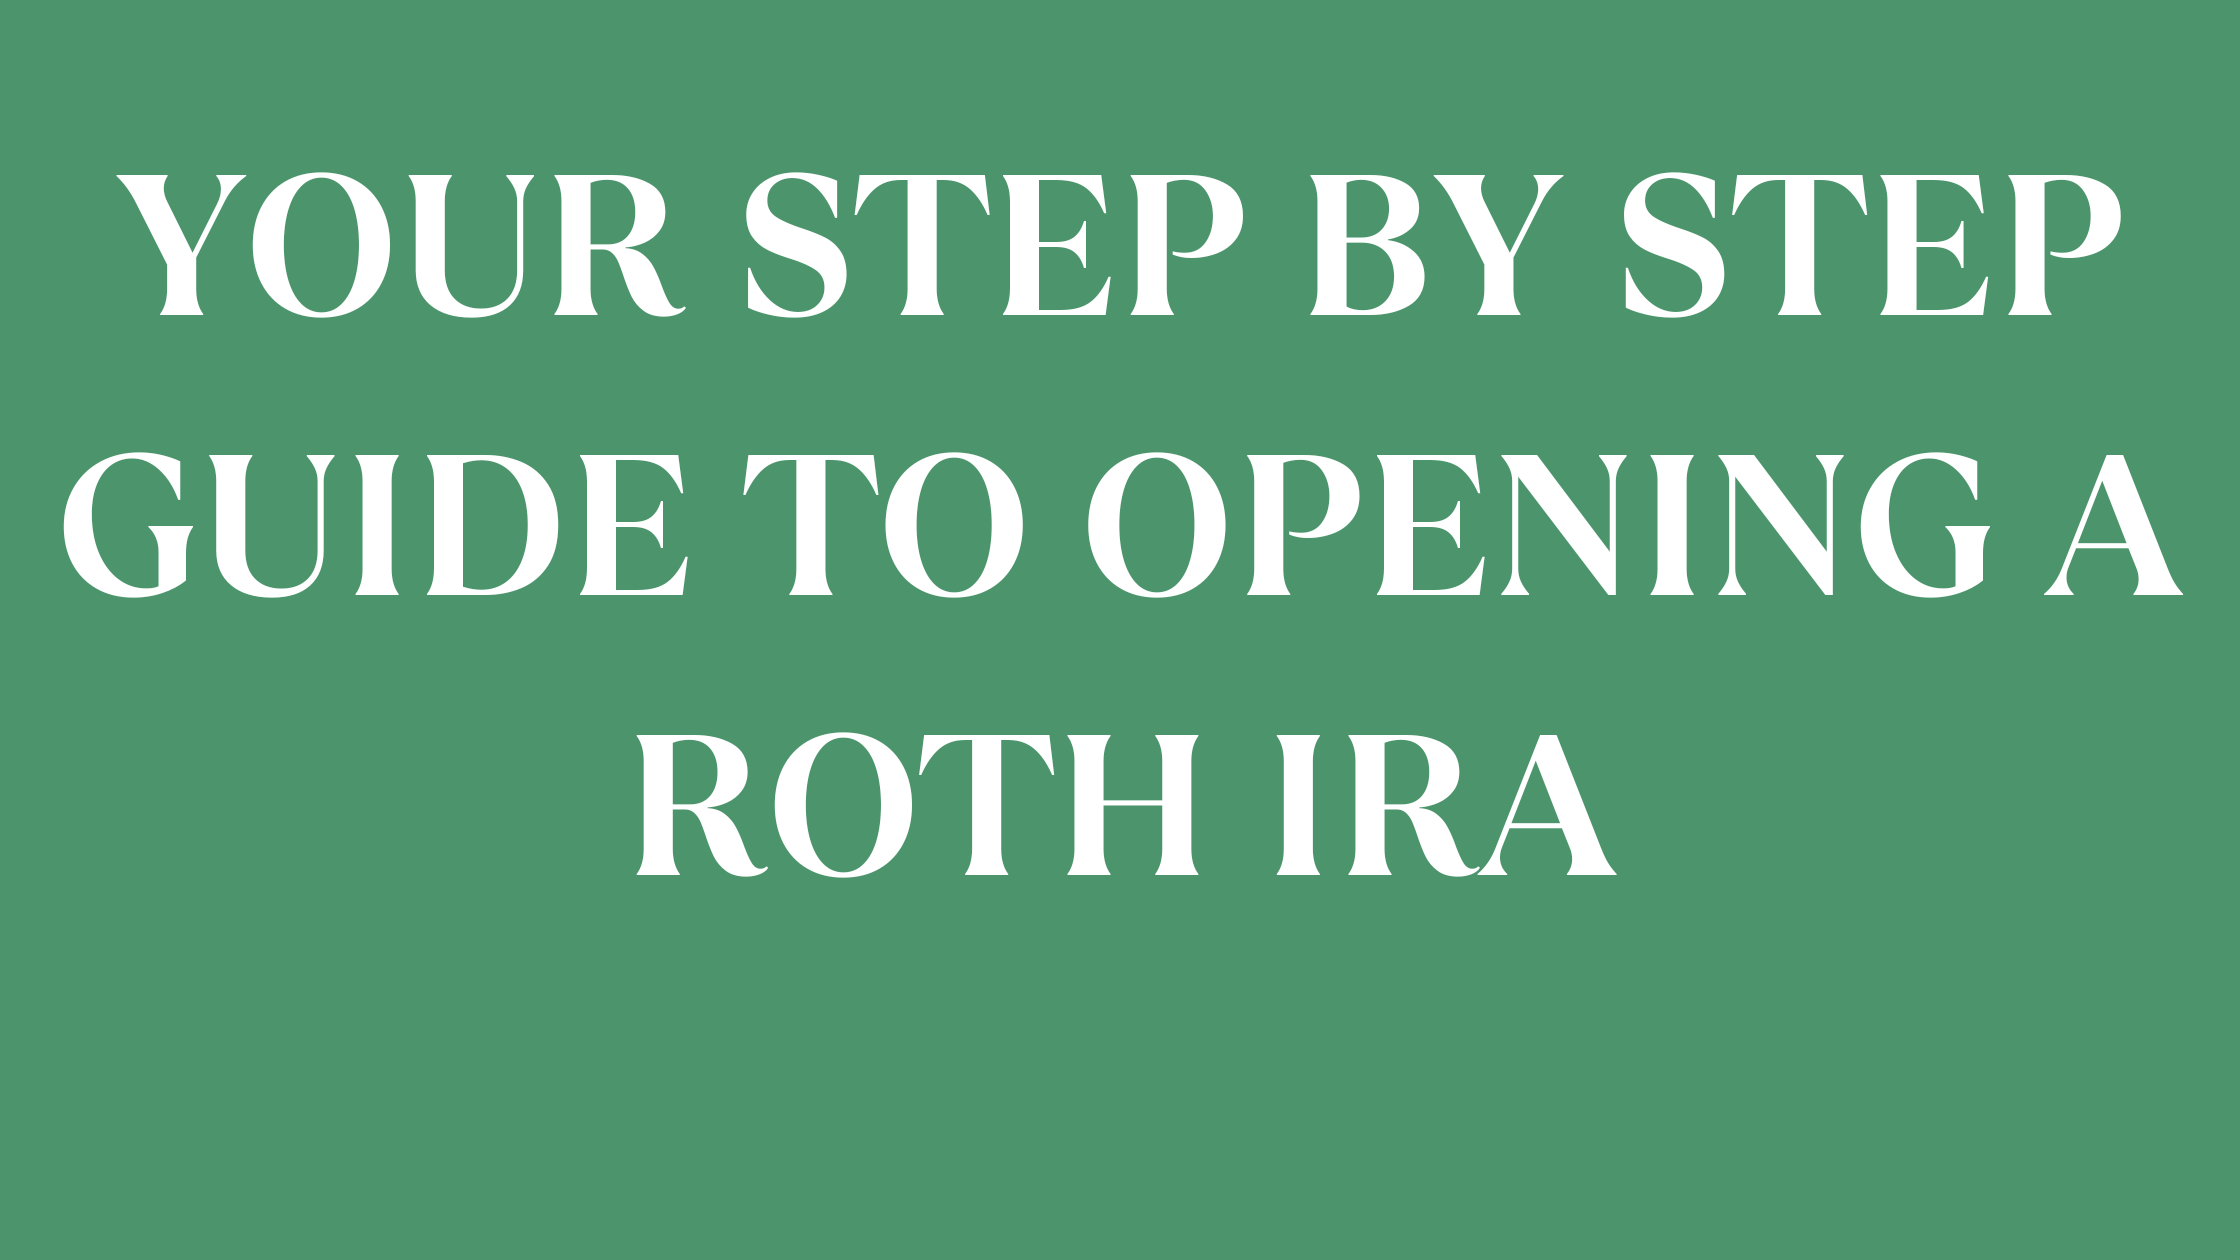 YOUR STEP BY STEP GUIDE TO OPENING A ROTH IRA